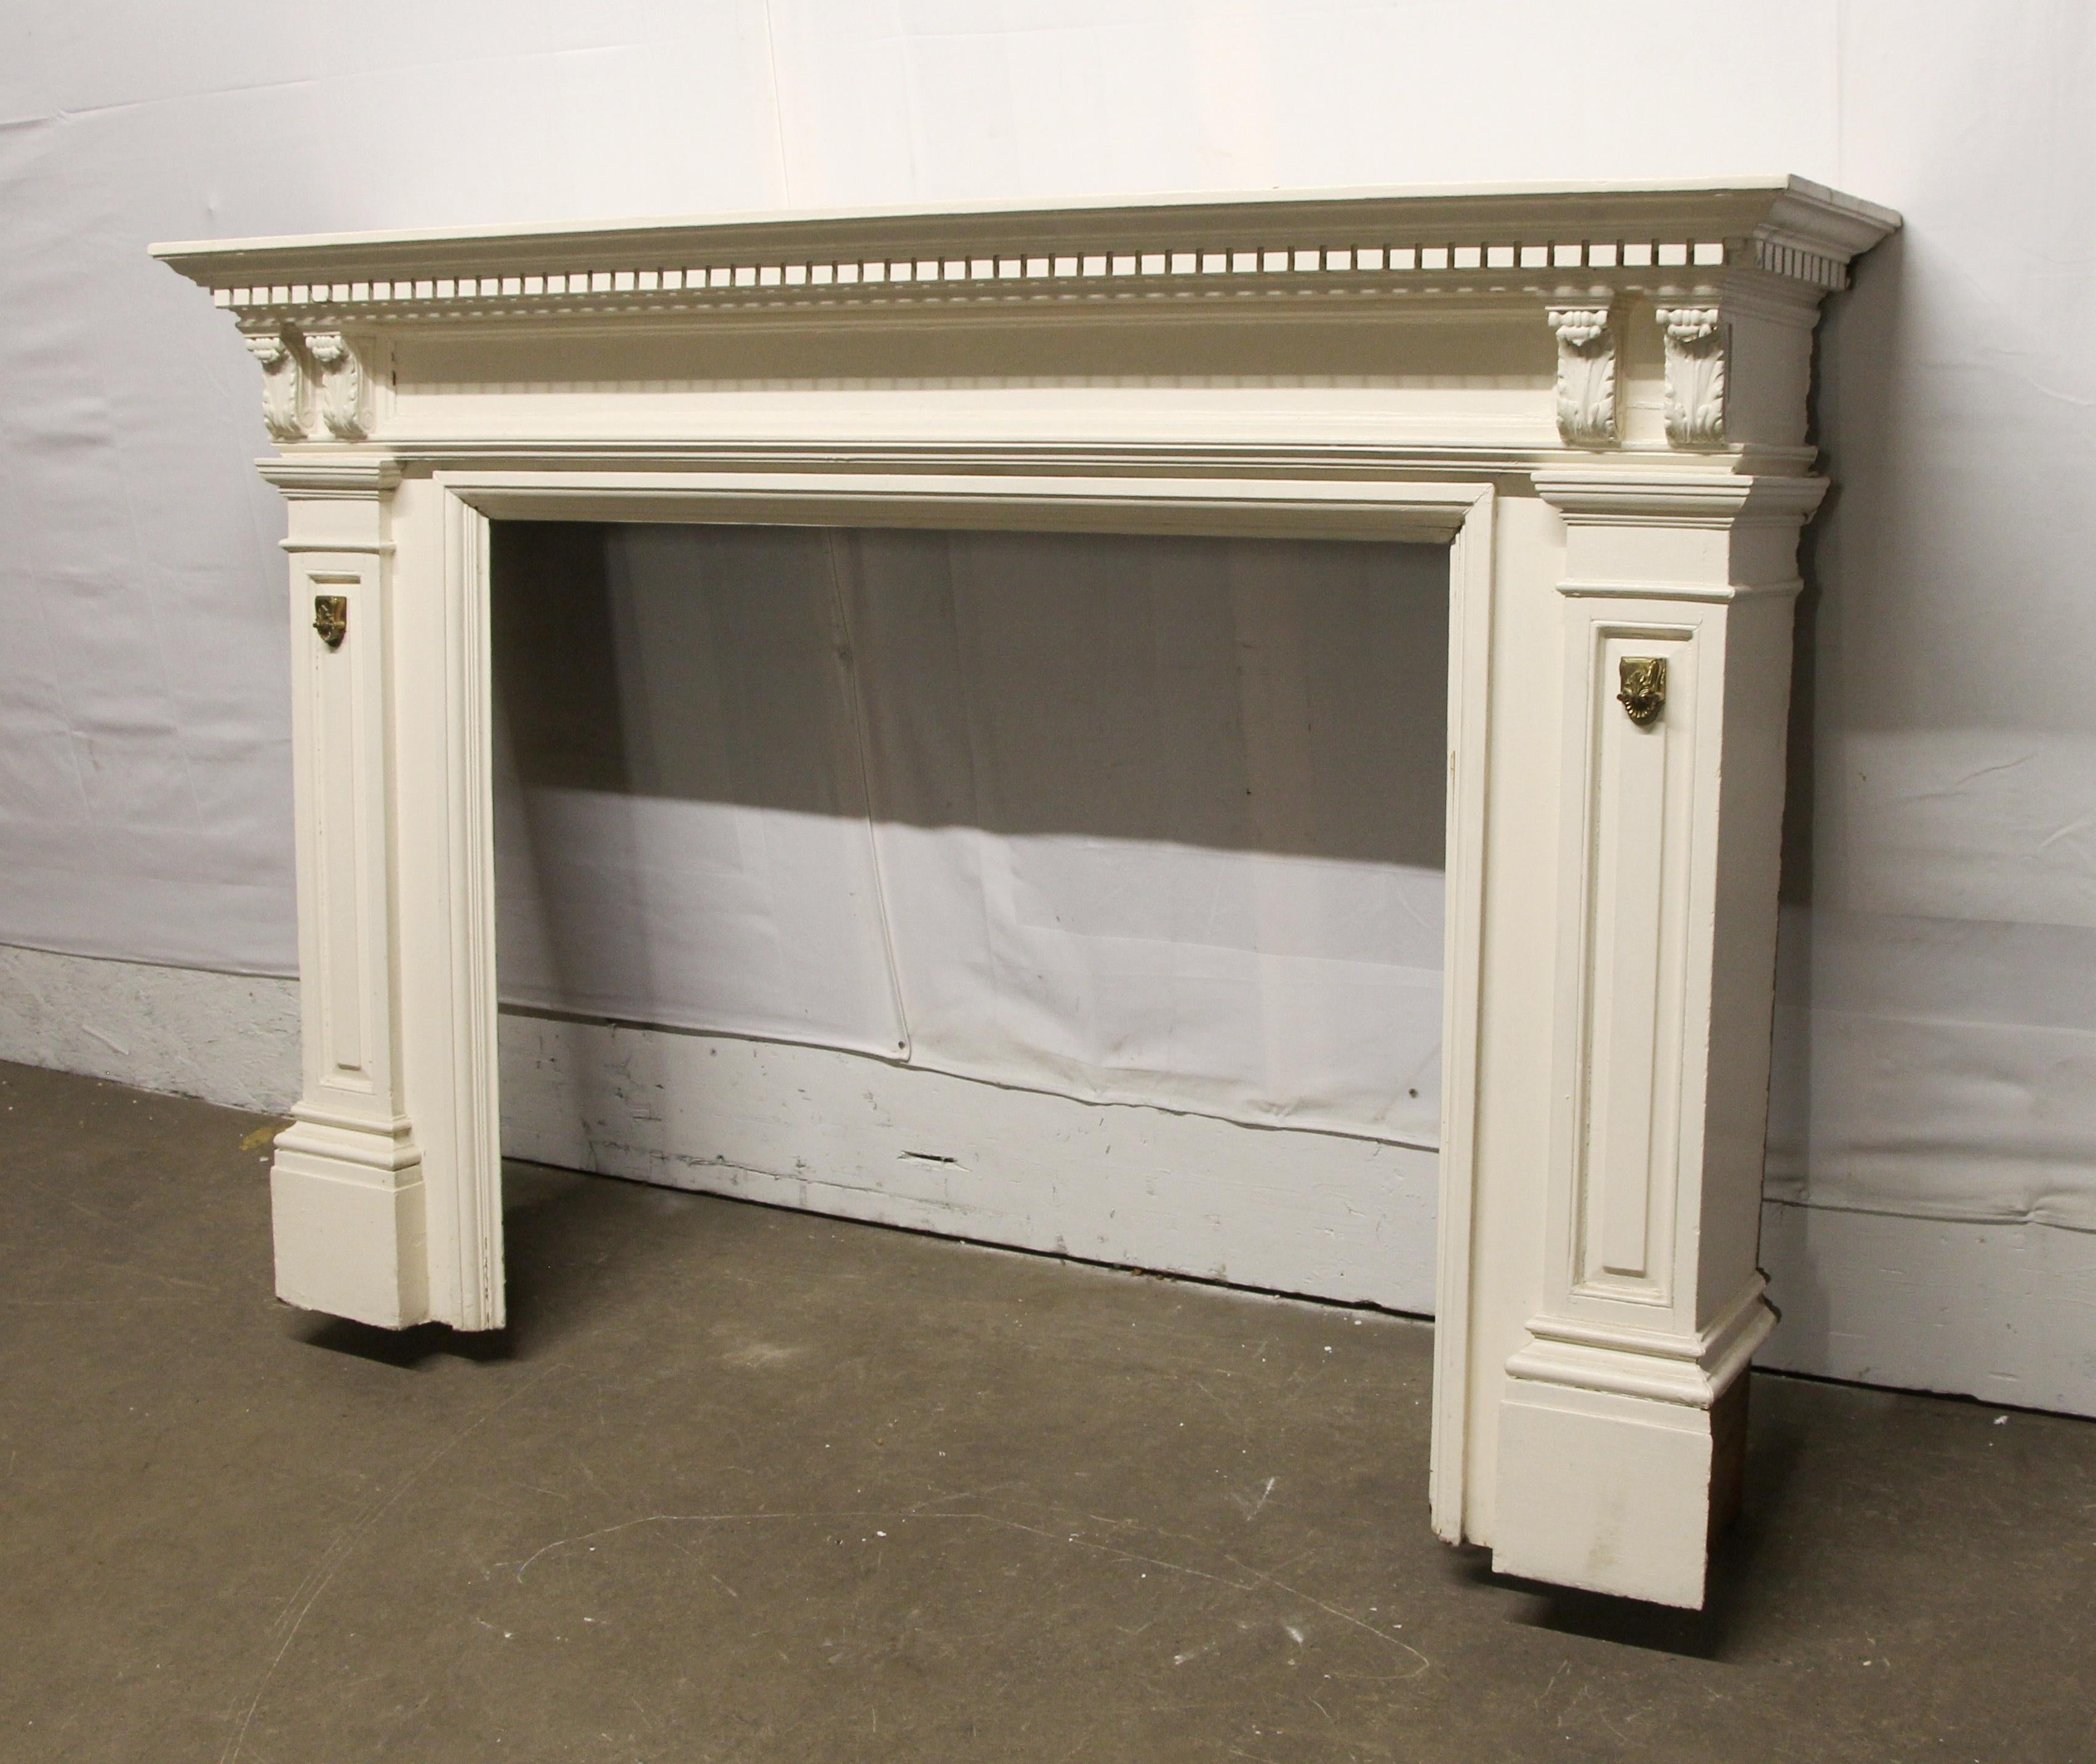 1910 carved and painted white wood mantel with brass details. There is general wear from age and use, along with minor damages. Please see photos. This can be seen at our 400 Gilligan St location in Scranton, PA.